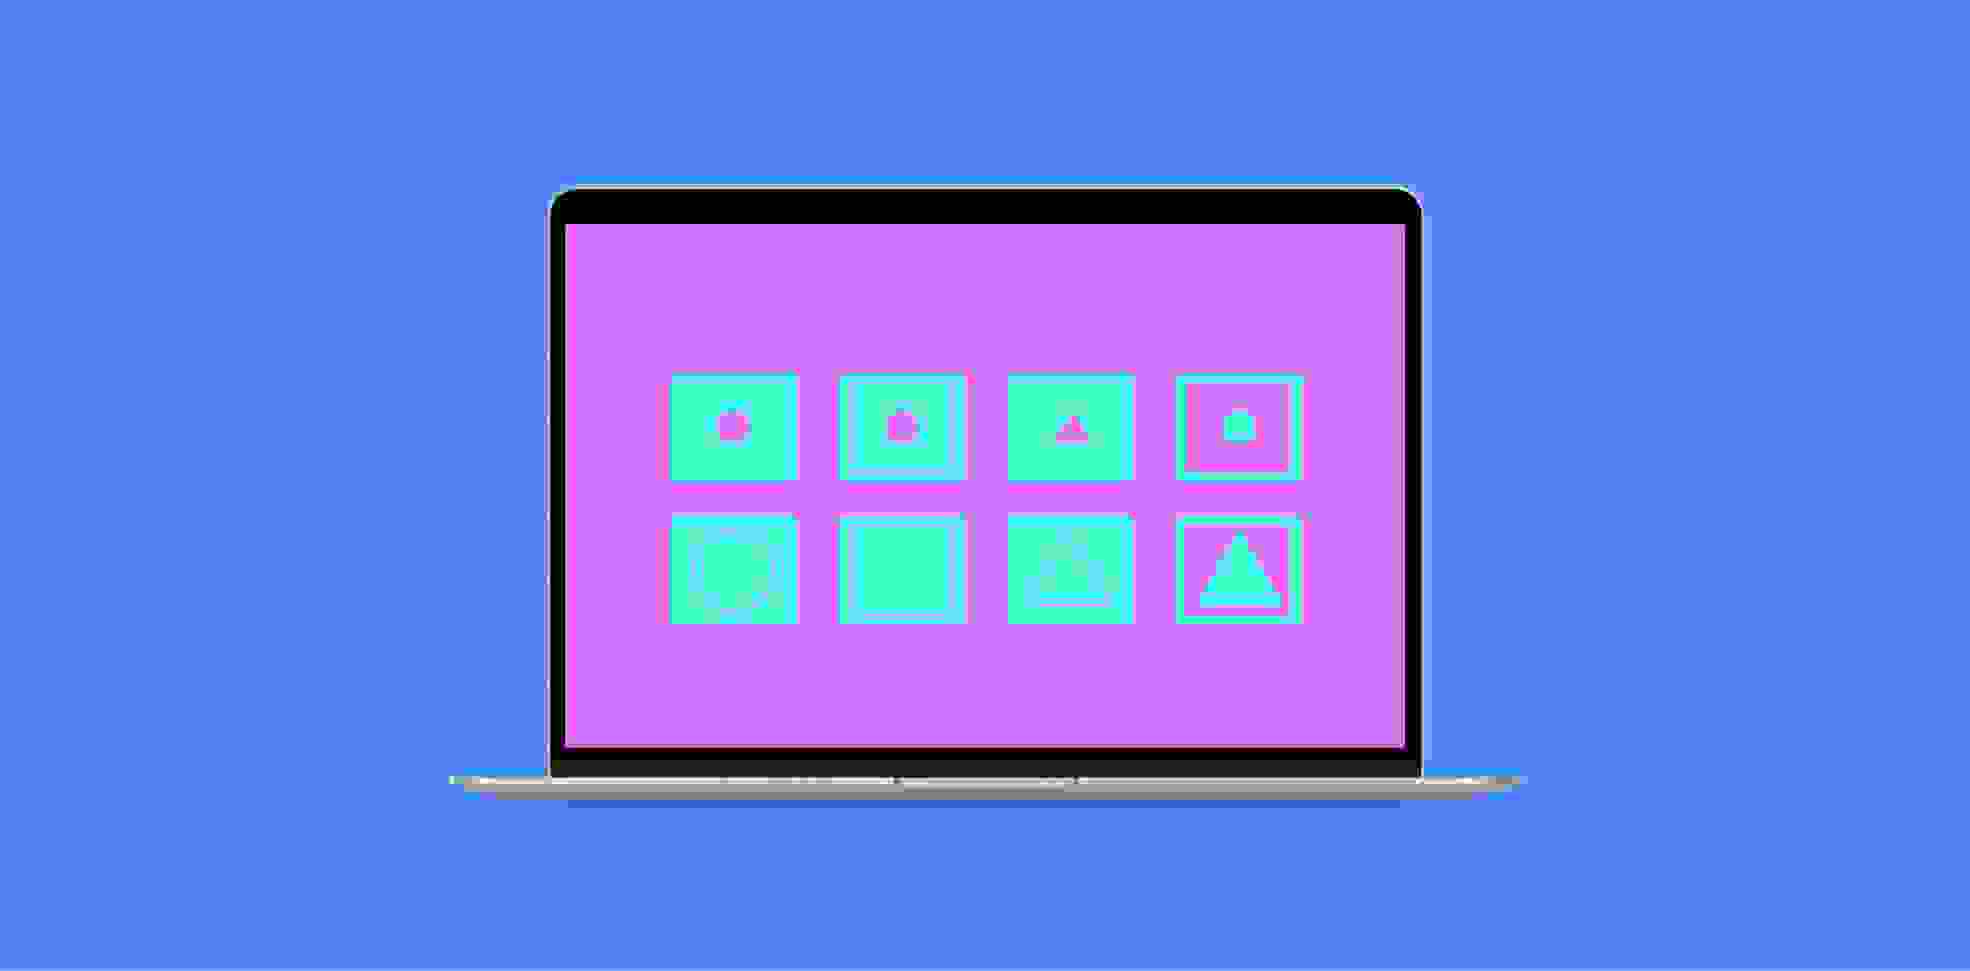 cards with symbols on a laptop screen on a blue background